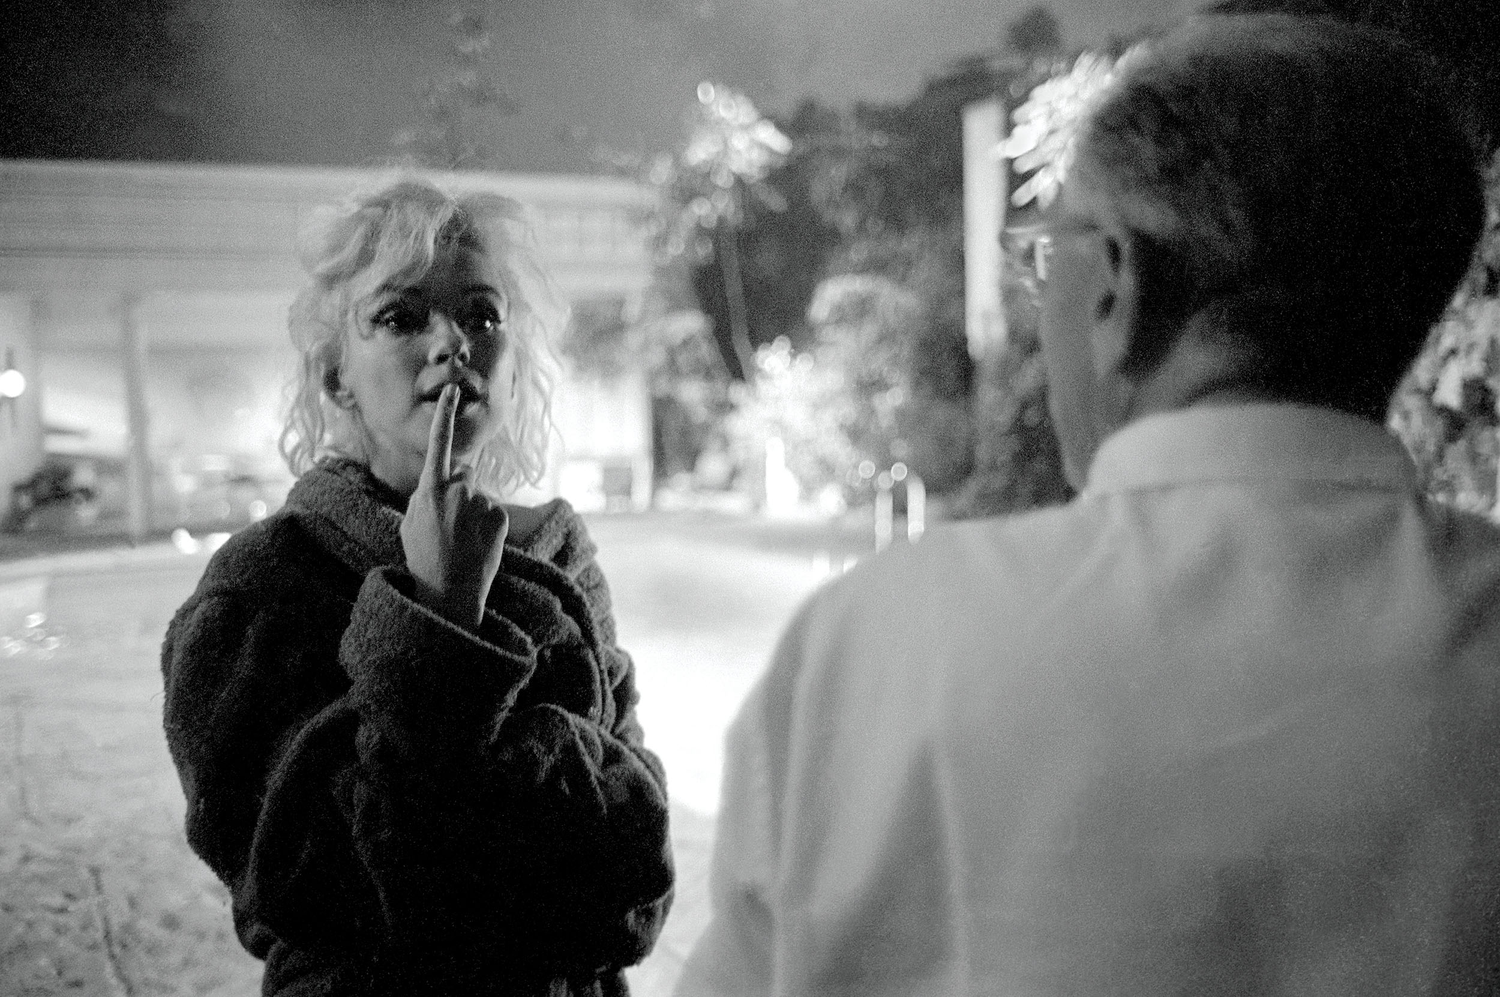 Marilyn Monroe Photograph on Movie Set by Lawrence Schiller, 22/75